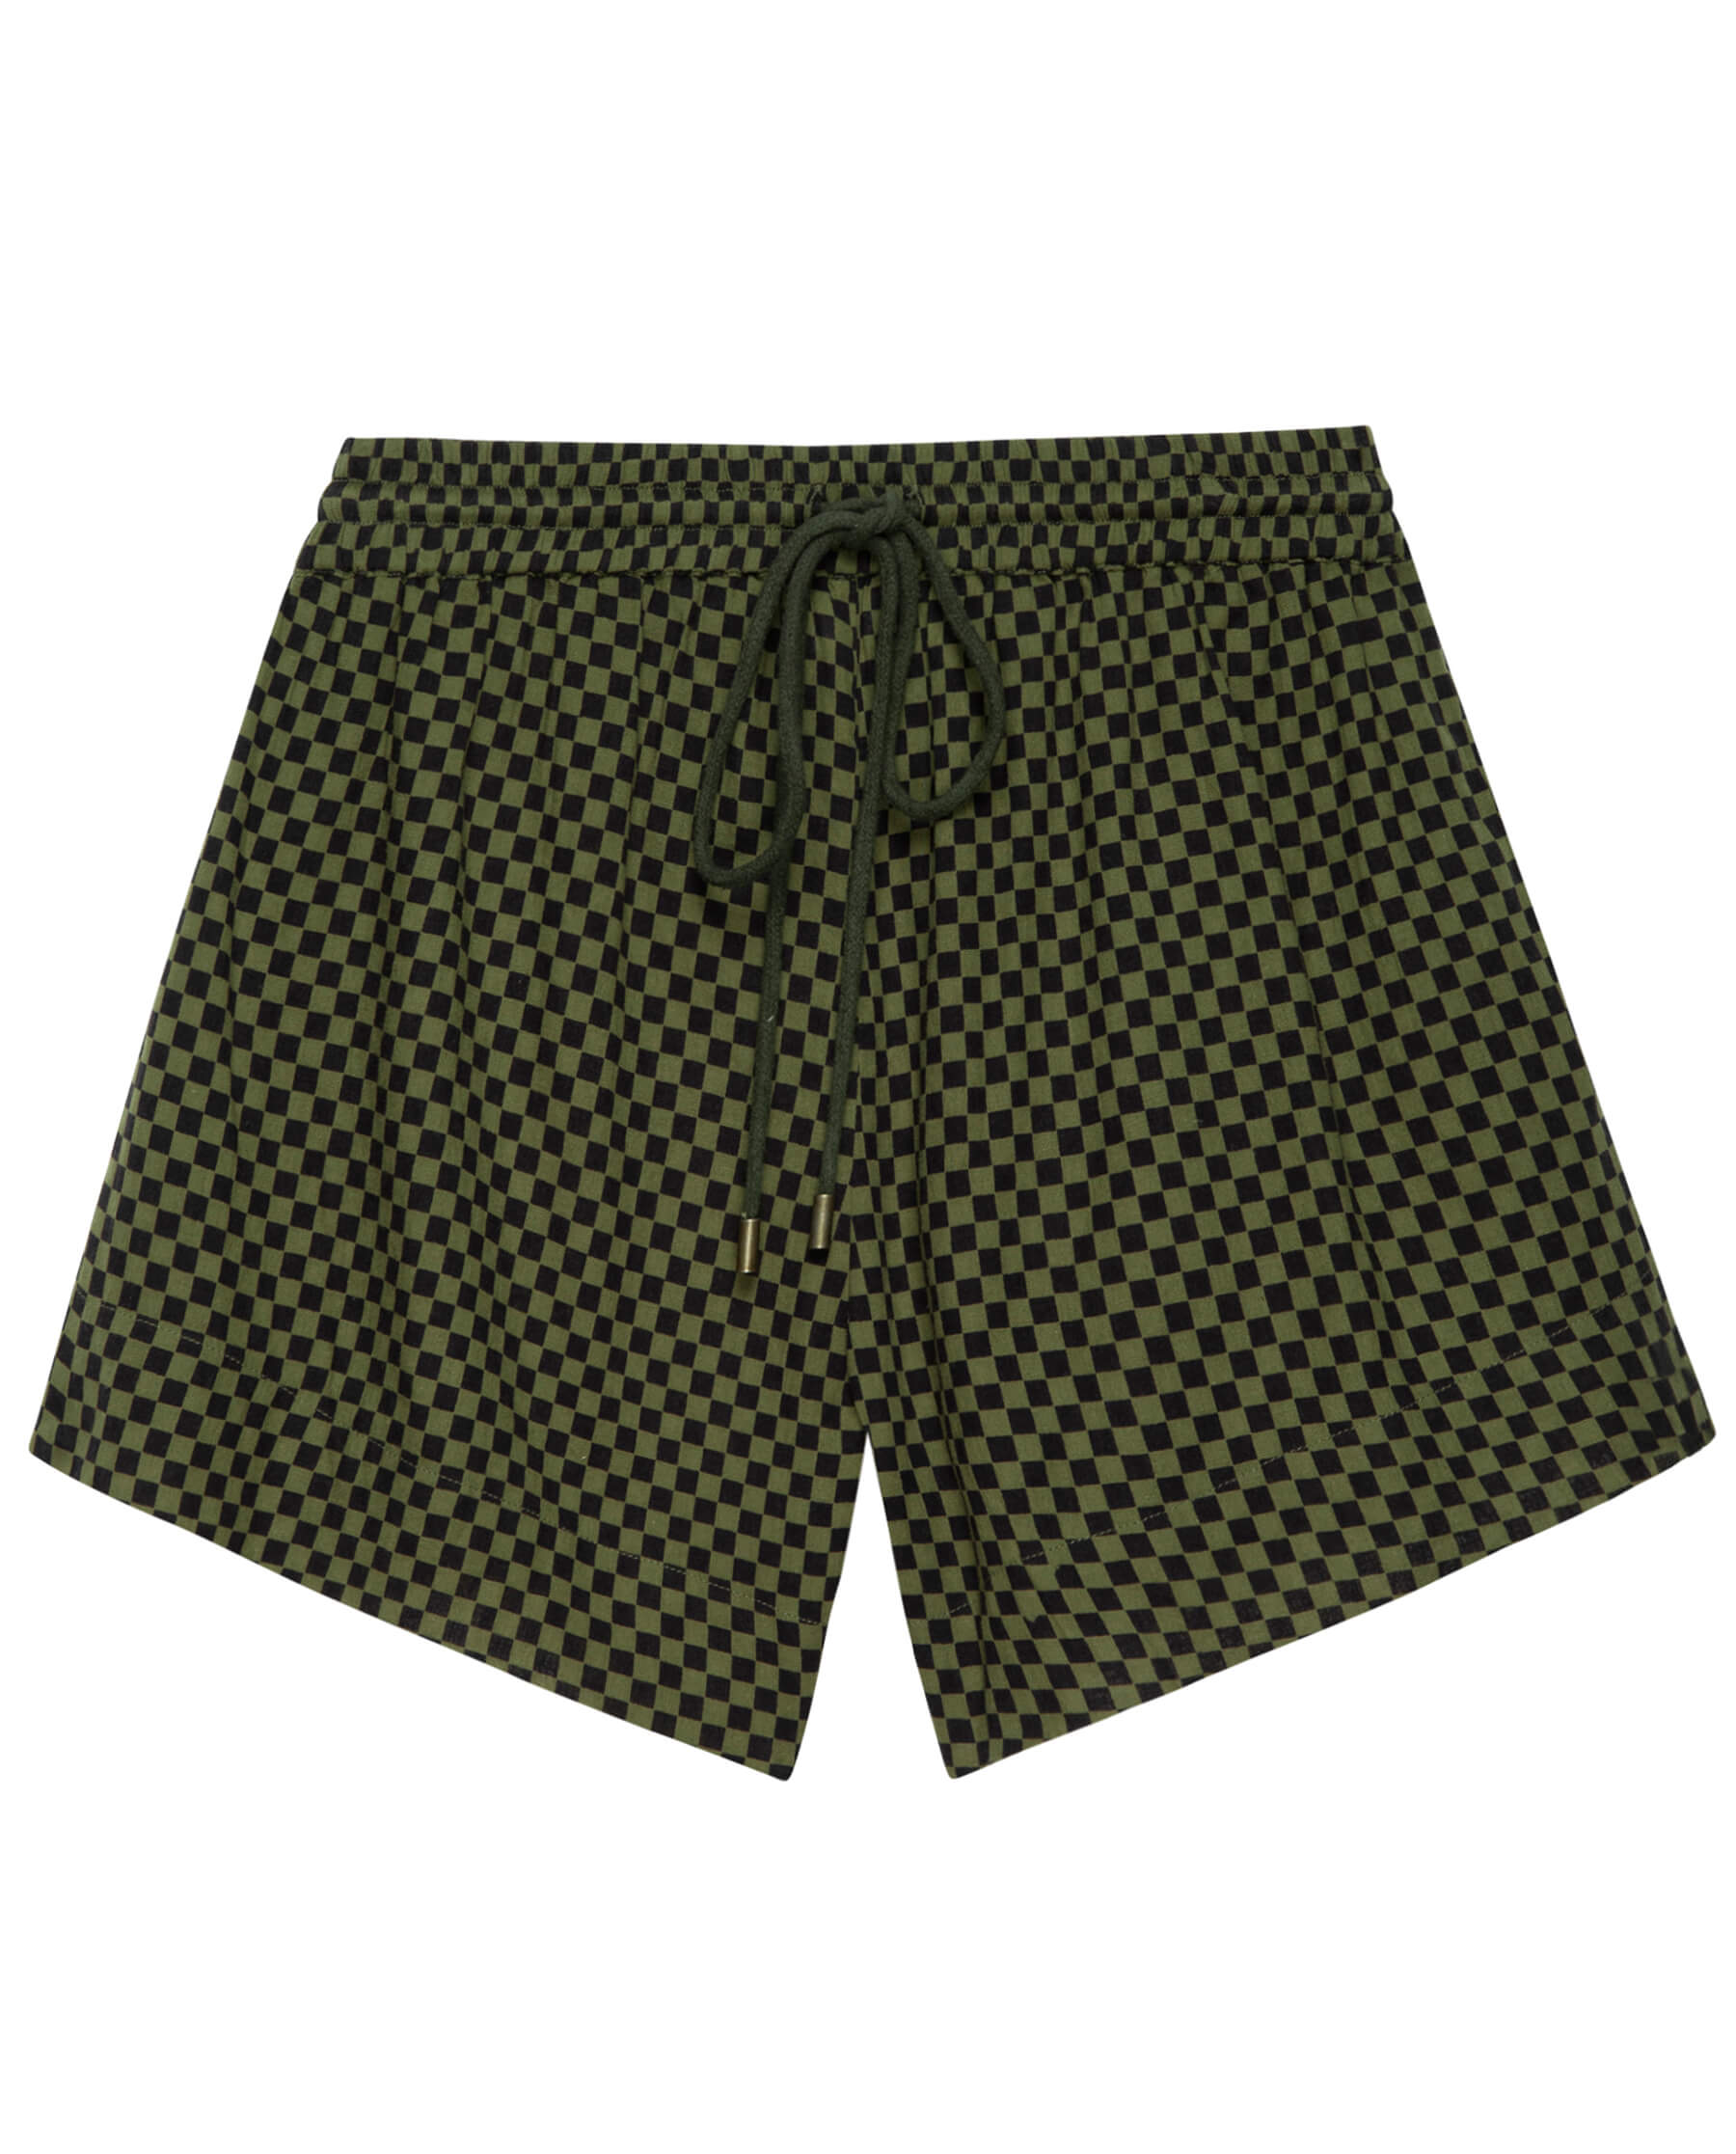 The Delta Short. -- Dark Army Check COVER-UP SHORTS THE GREAT. SP24 SWIM